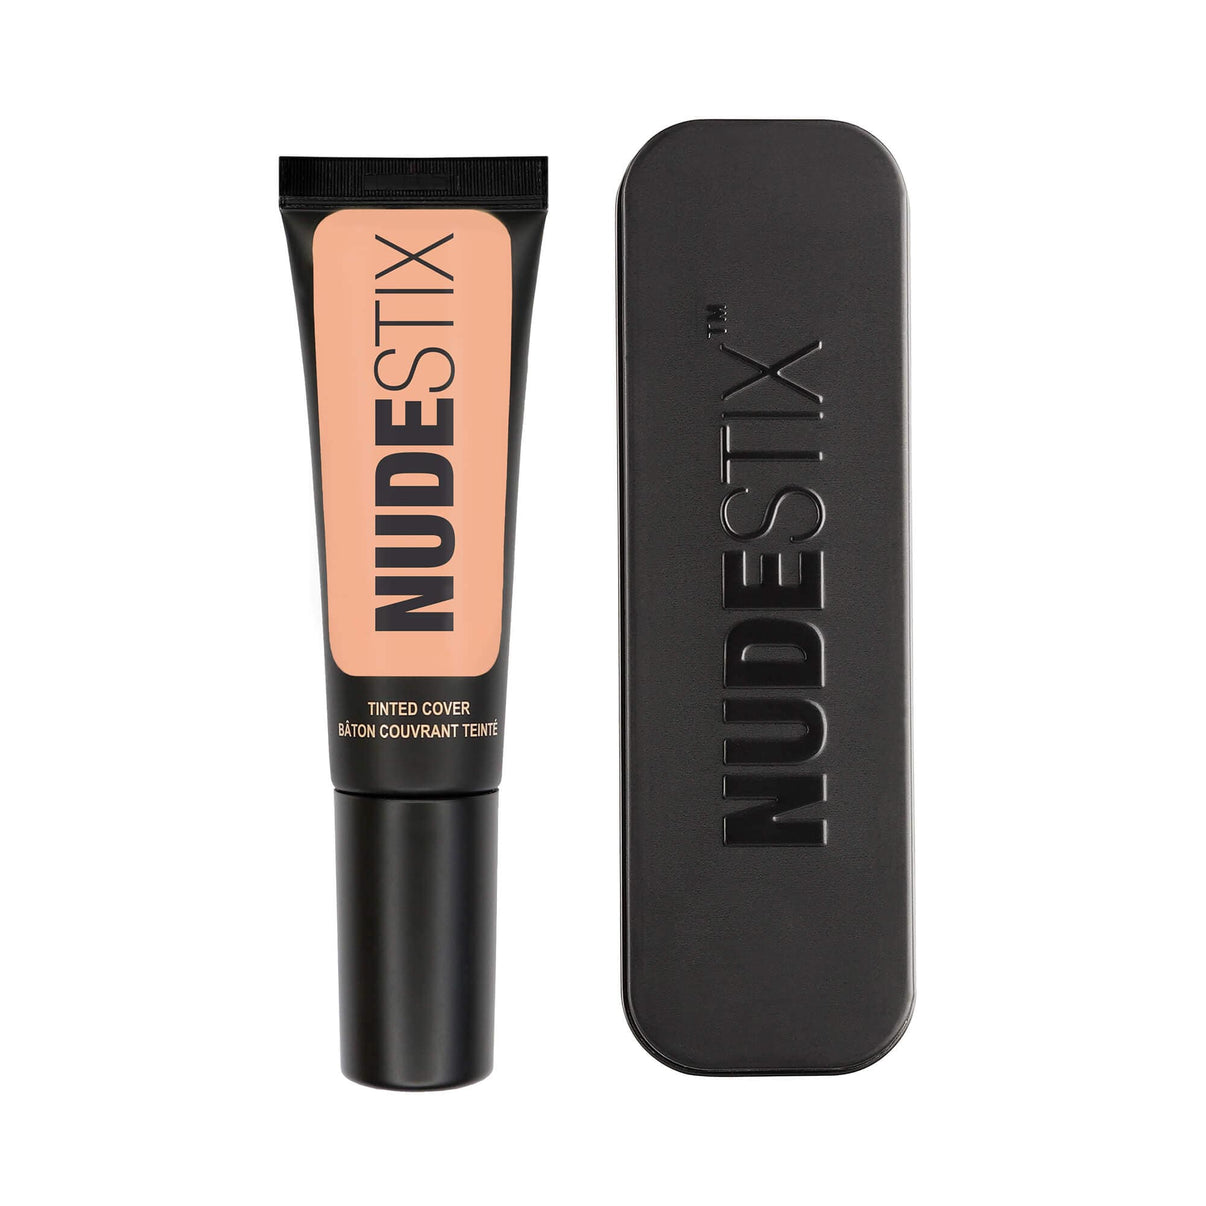 Tinted Cover Liquid Foundation in shade nude 4 with Nudestix can